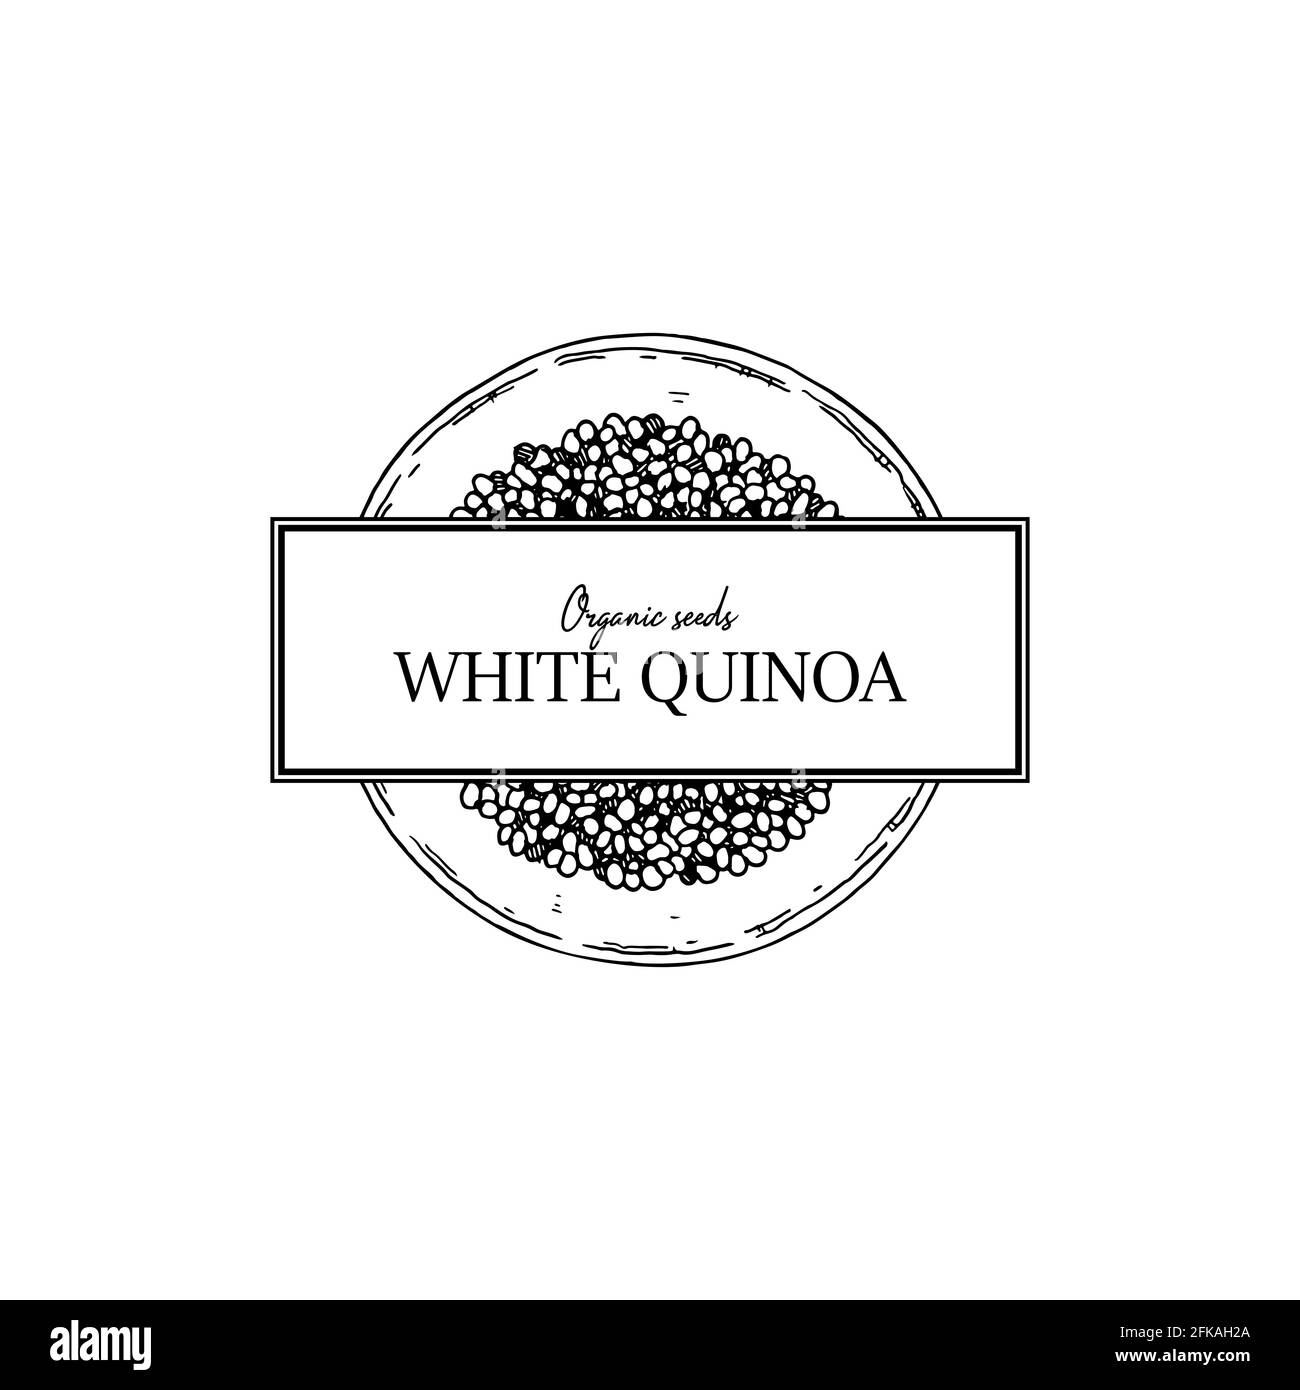 Packaging design Black and White Stock Photos & Images - Alamy